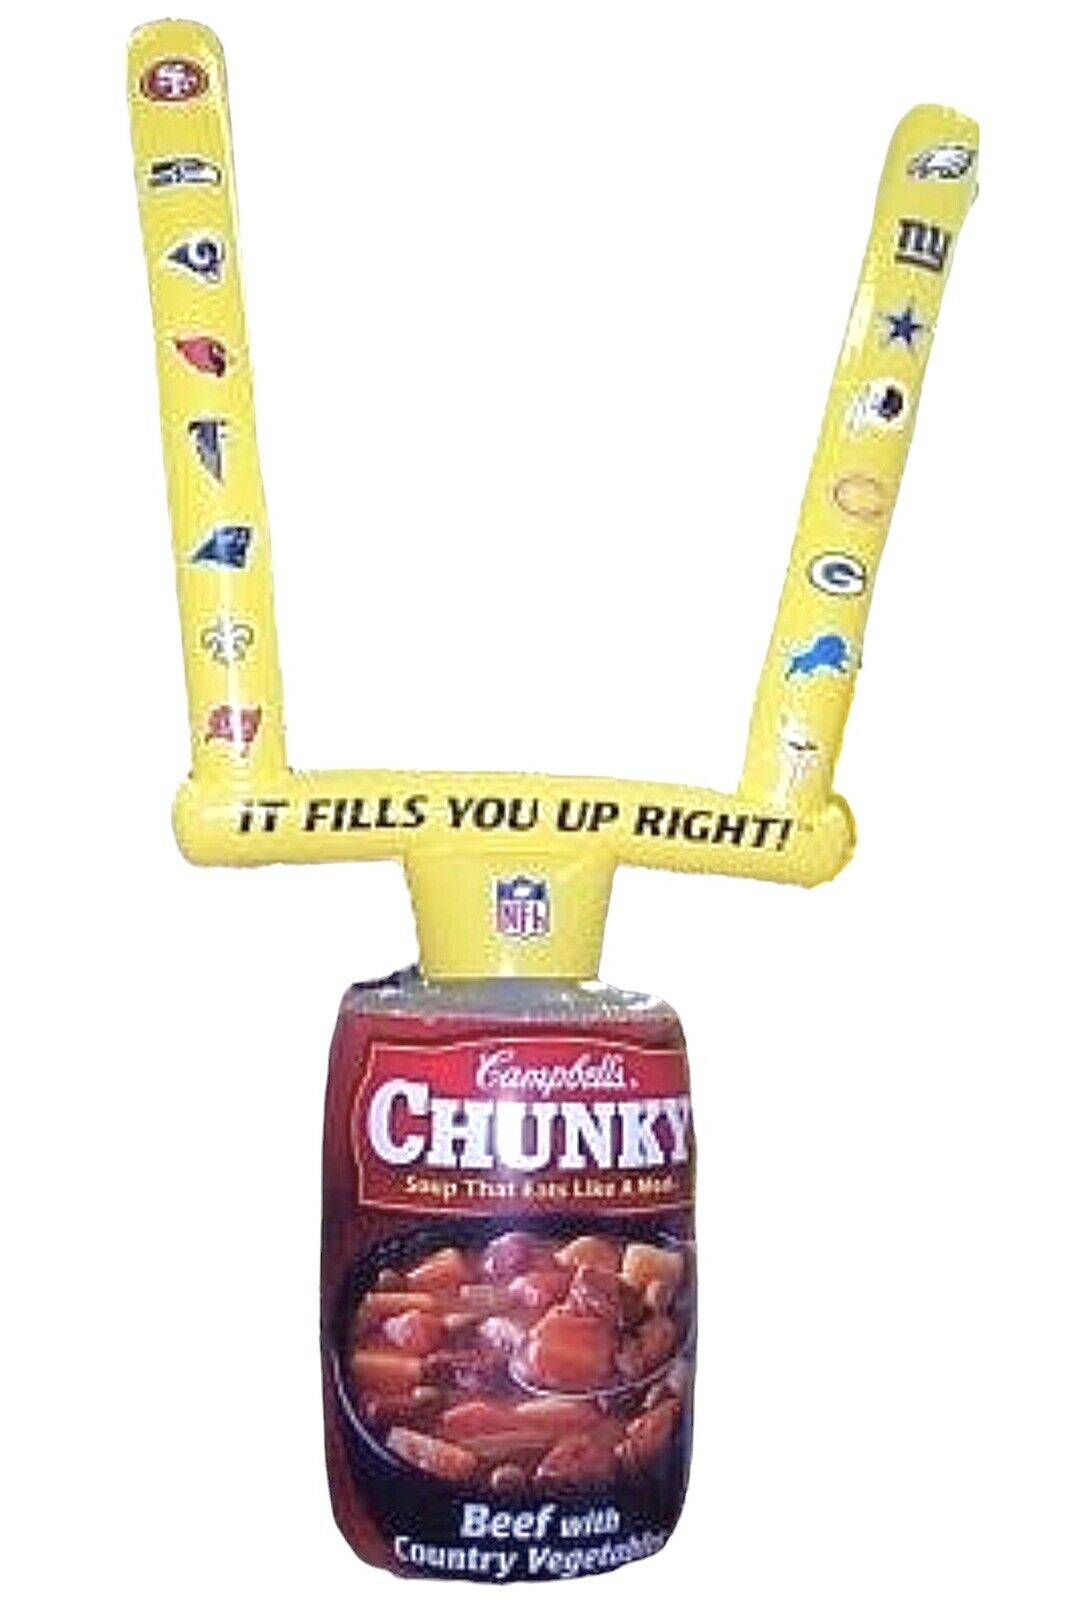 Campbells Chunky Soup Can Inflatable Goalpost NFL Football NOS Sealed 82” Tall